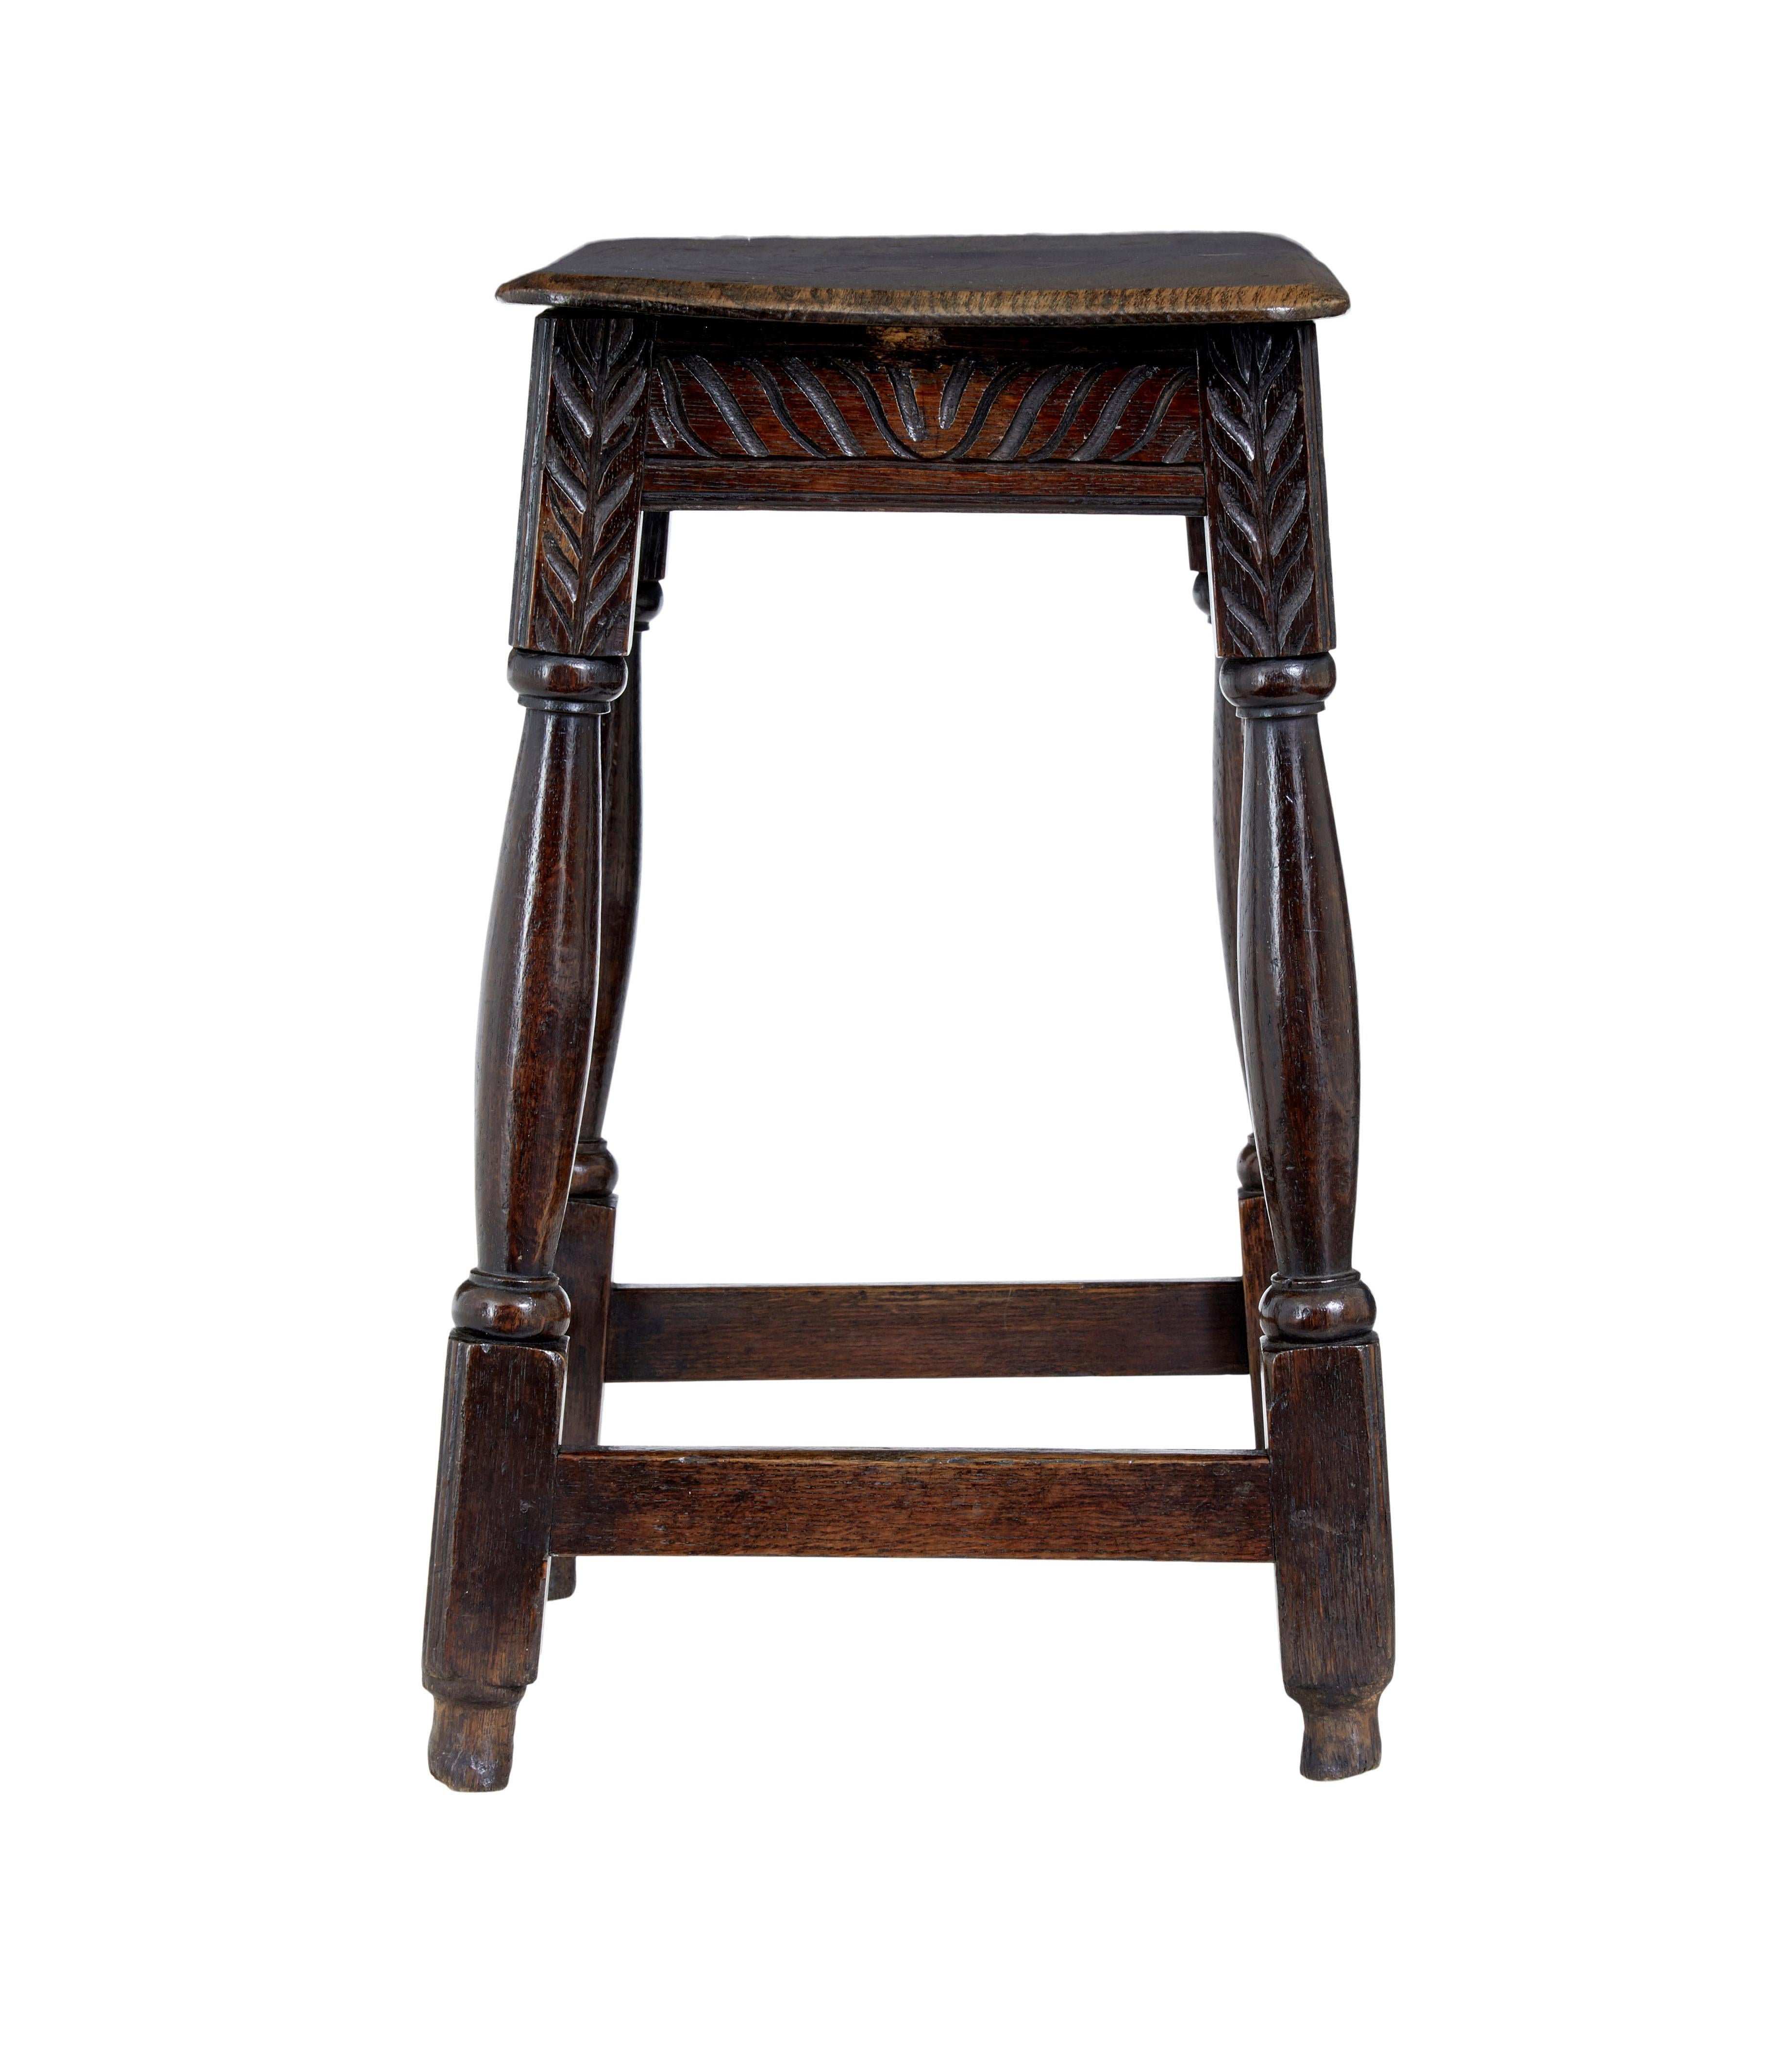 Gothic Revival 19th Century Carved Oak Joint Stool